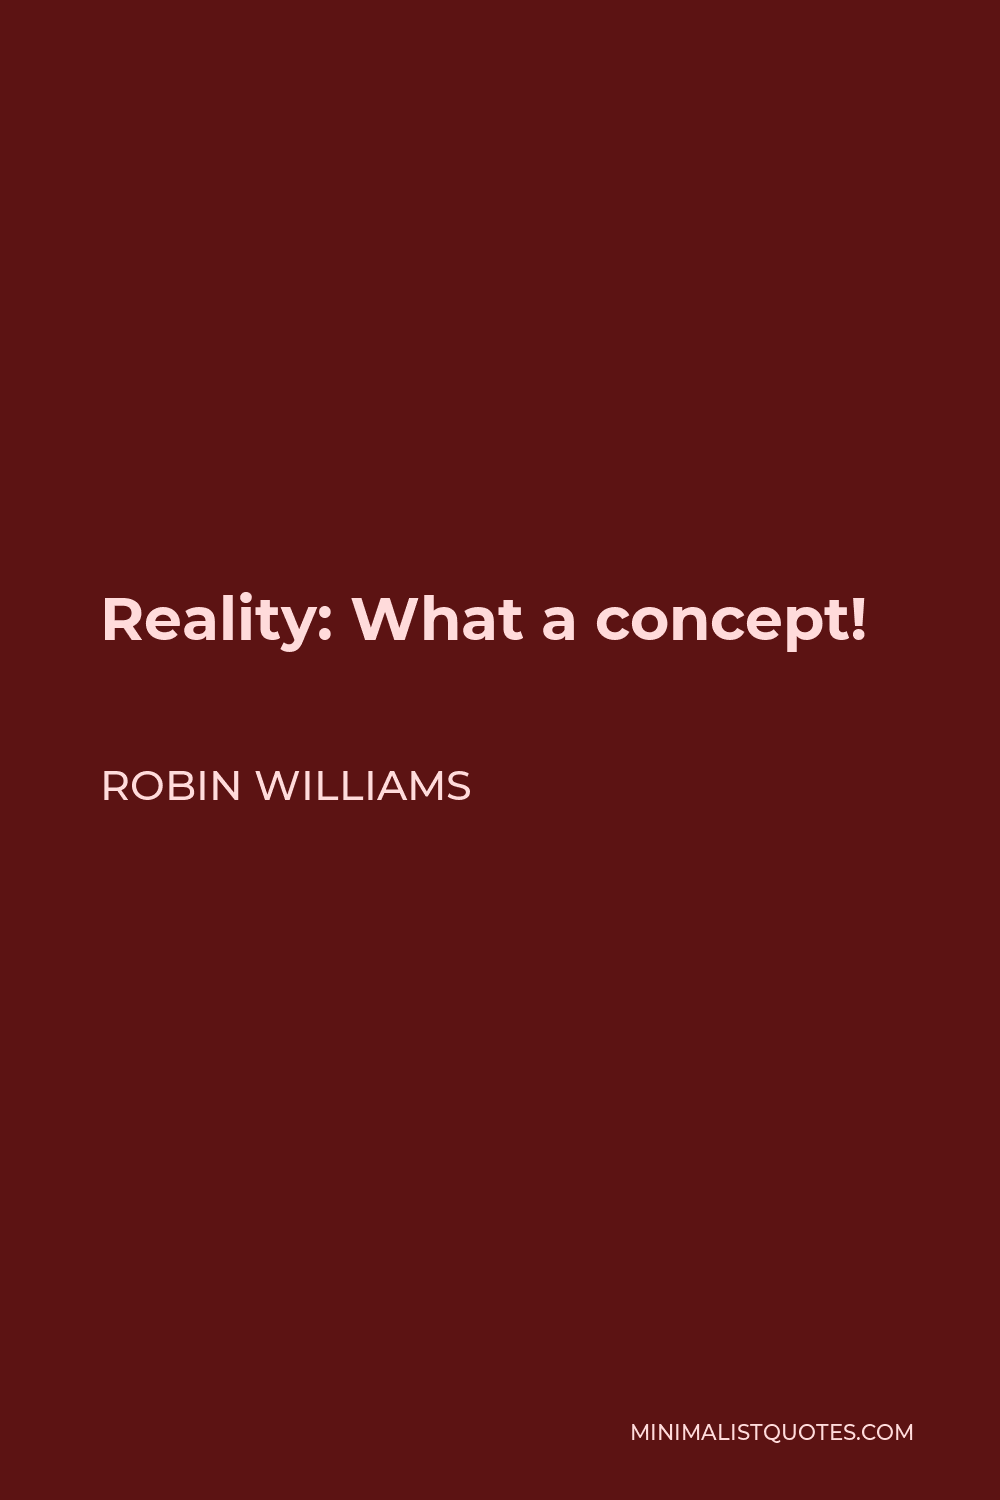 Robin Williams Quote - Reality: What a concept!